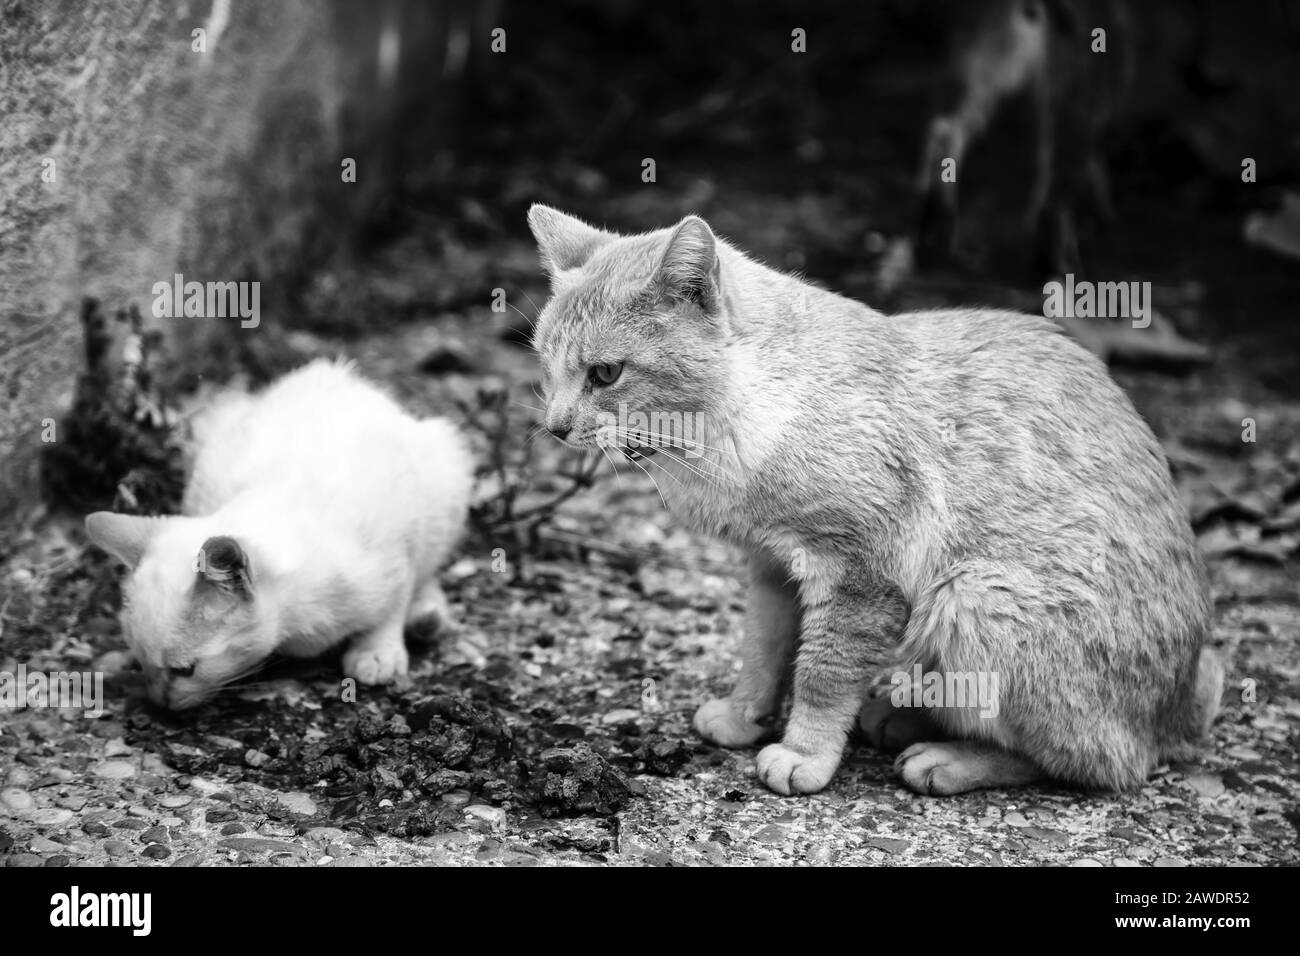 Street cats eating, detail of abandoned animals Stock Photo